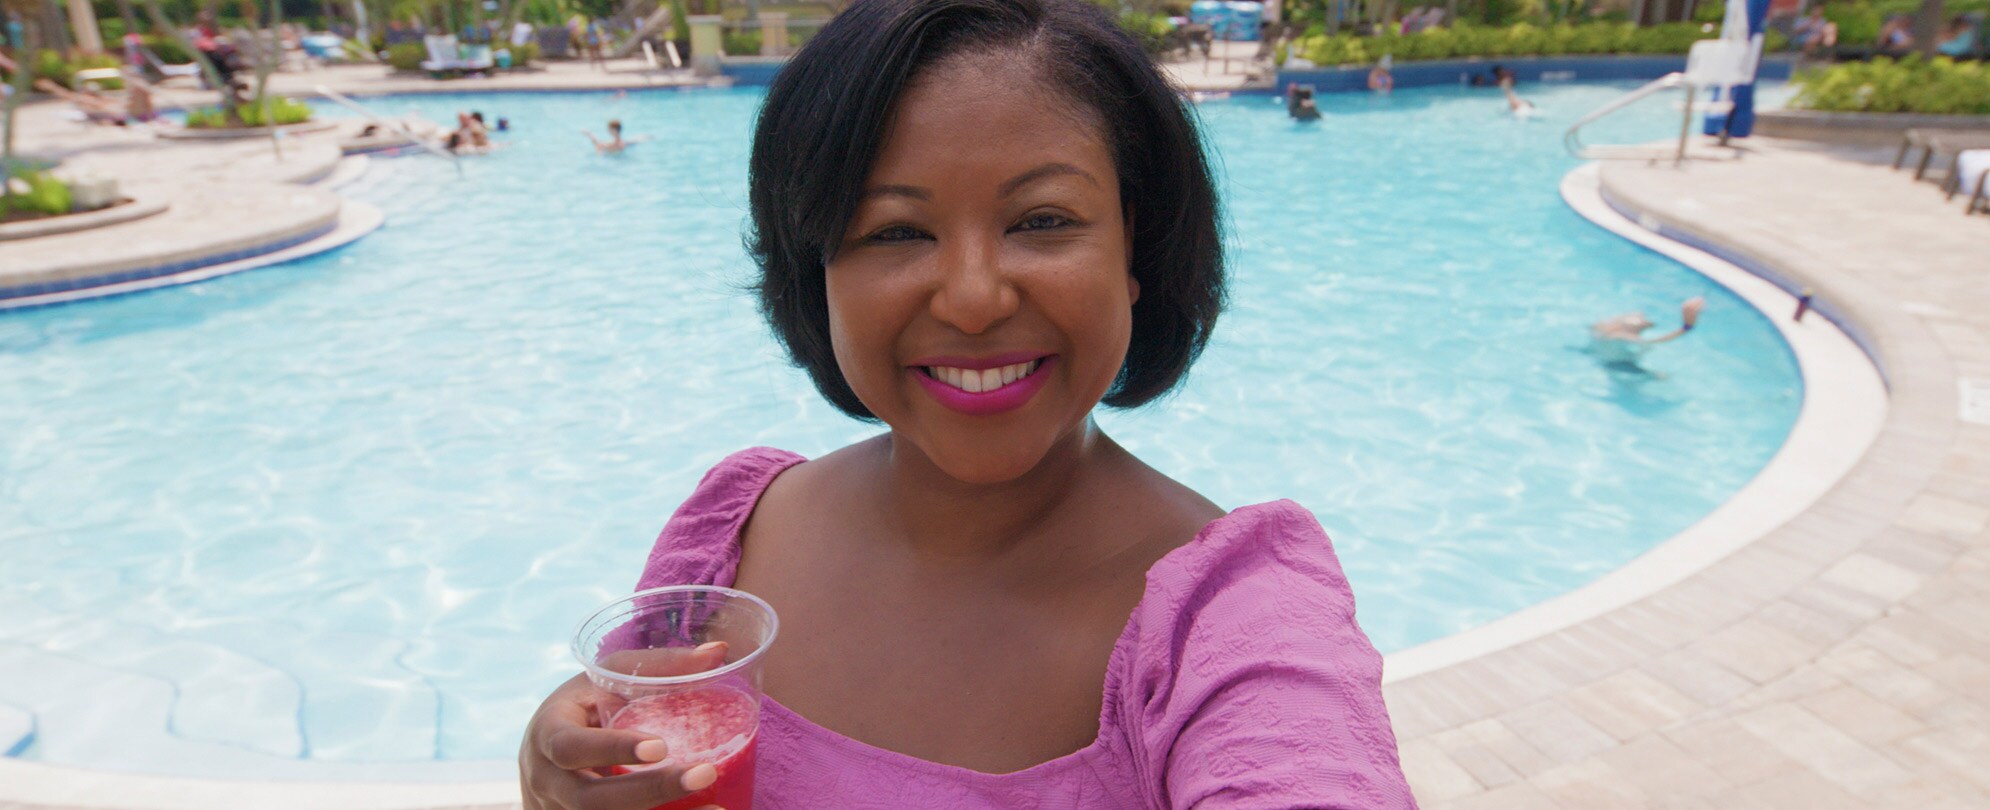 A woman is taking a selfie while drinking a cocktail in front of a pool.